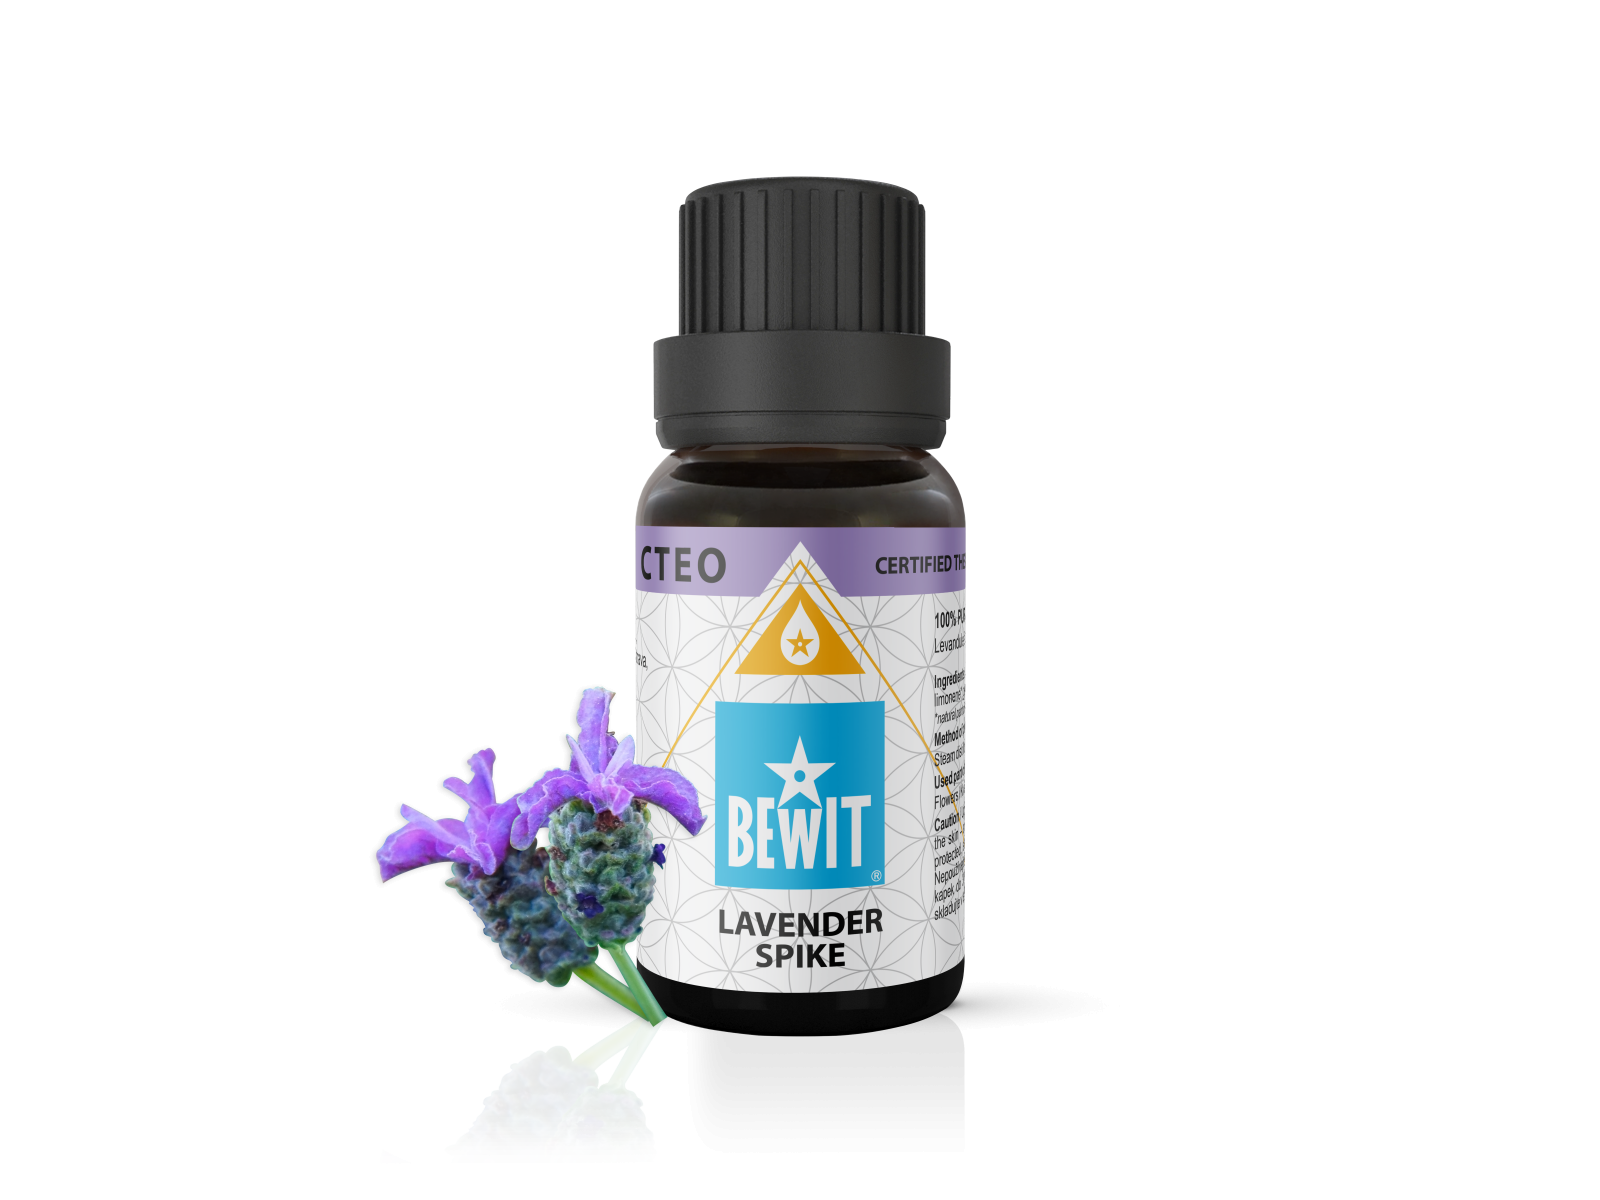 BEWIT Lavender Spike - 100% pure and natural CTEO® essential oil